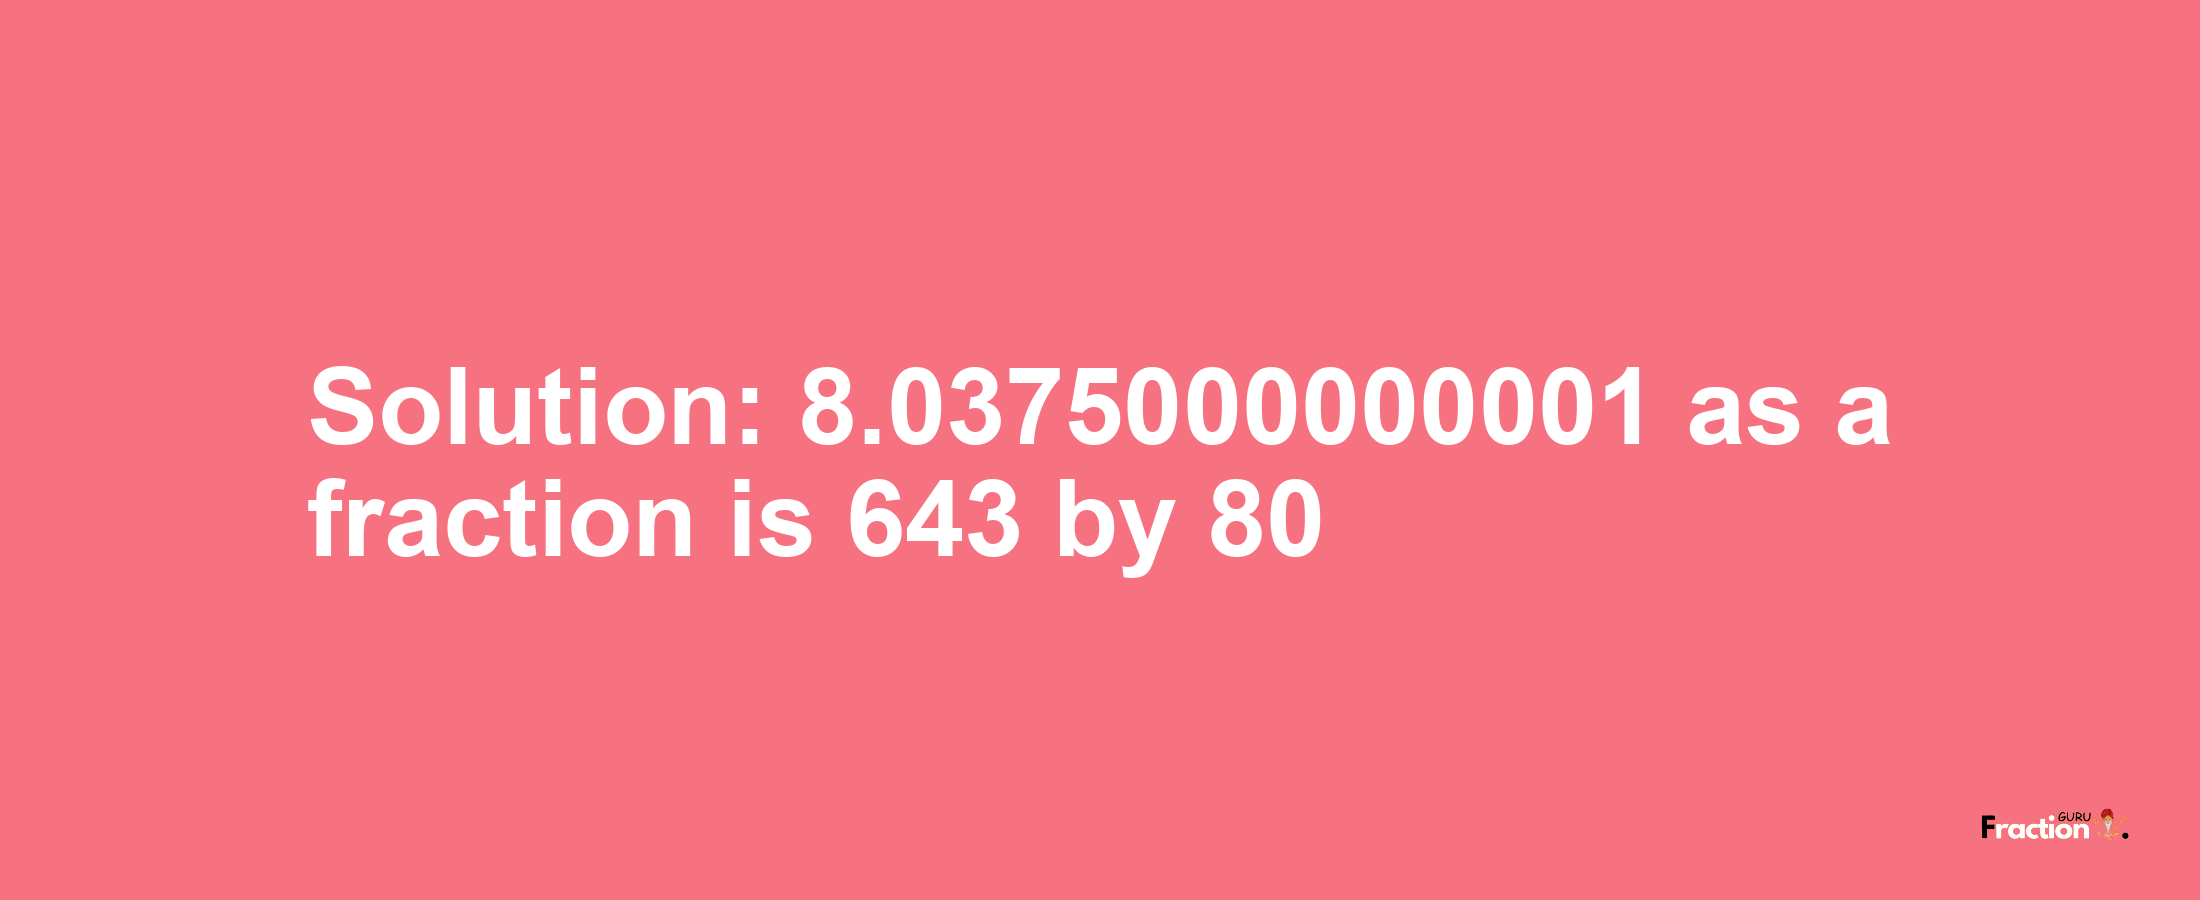 Solution:8.0375000000001 as a fraction is 643/80